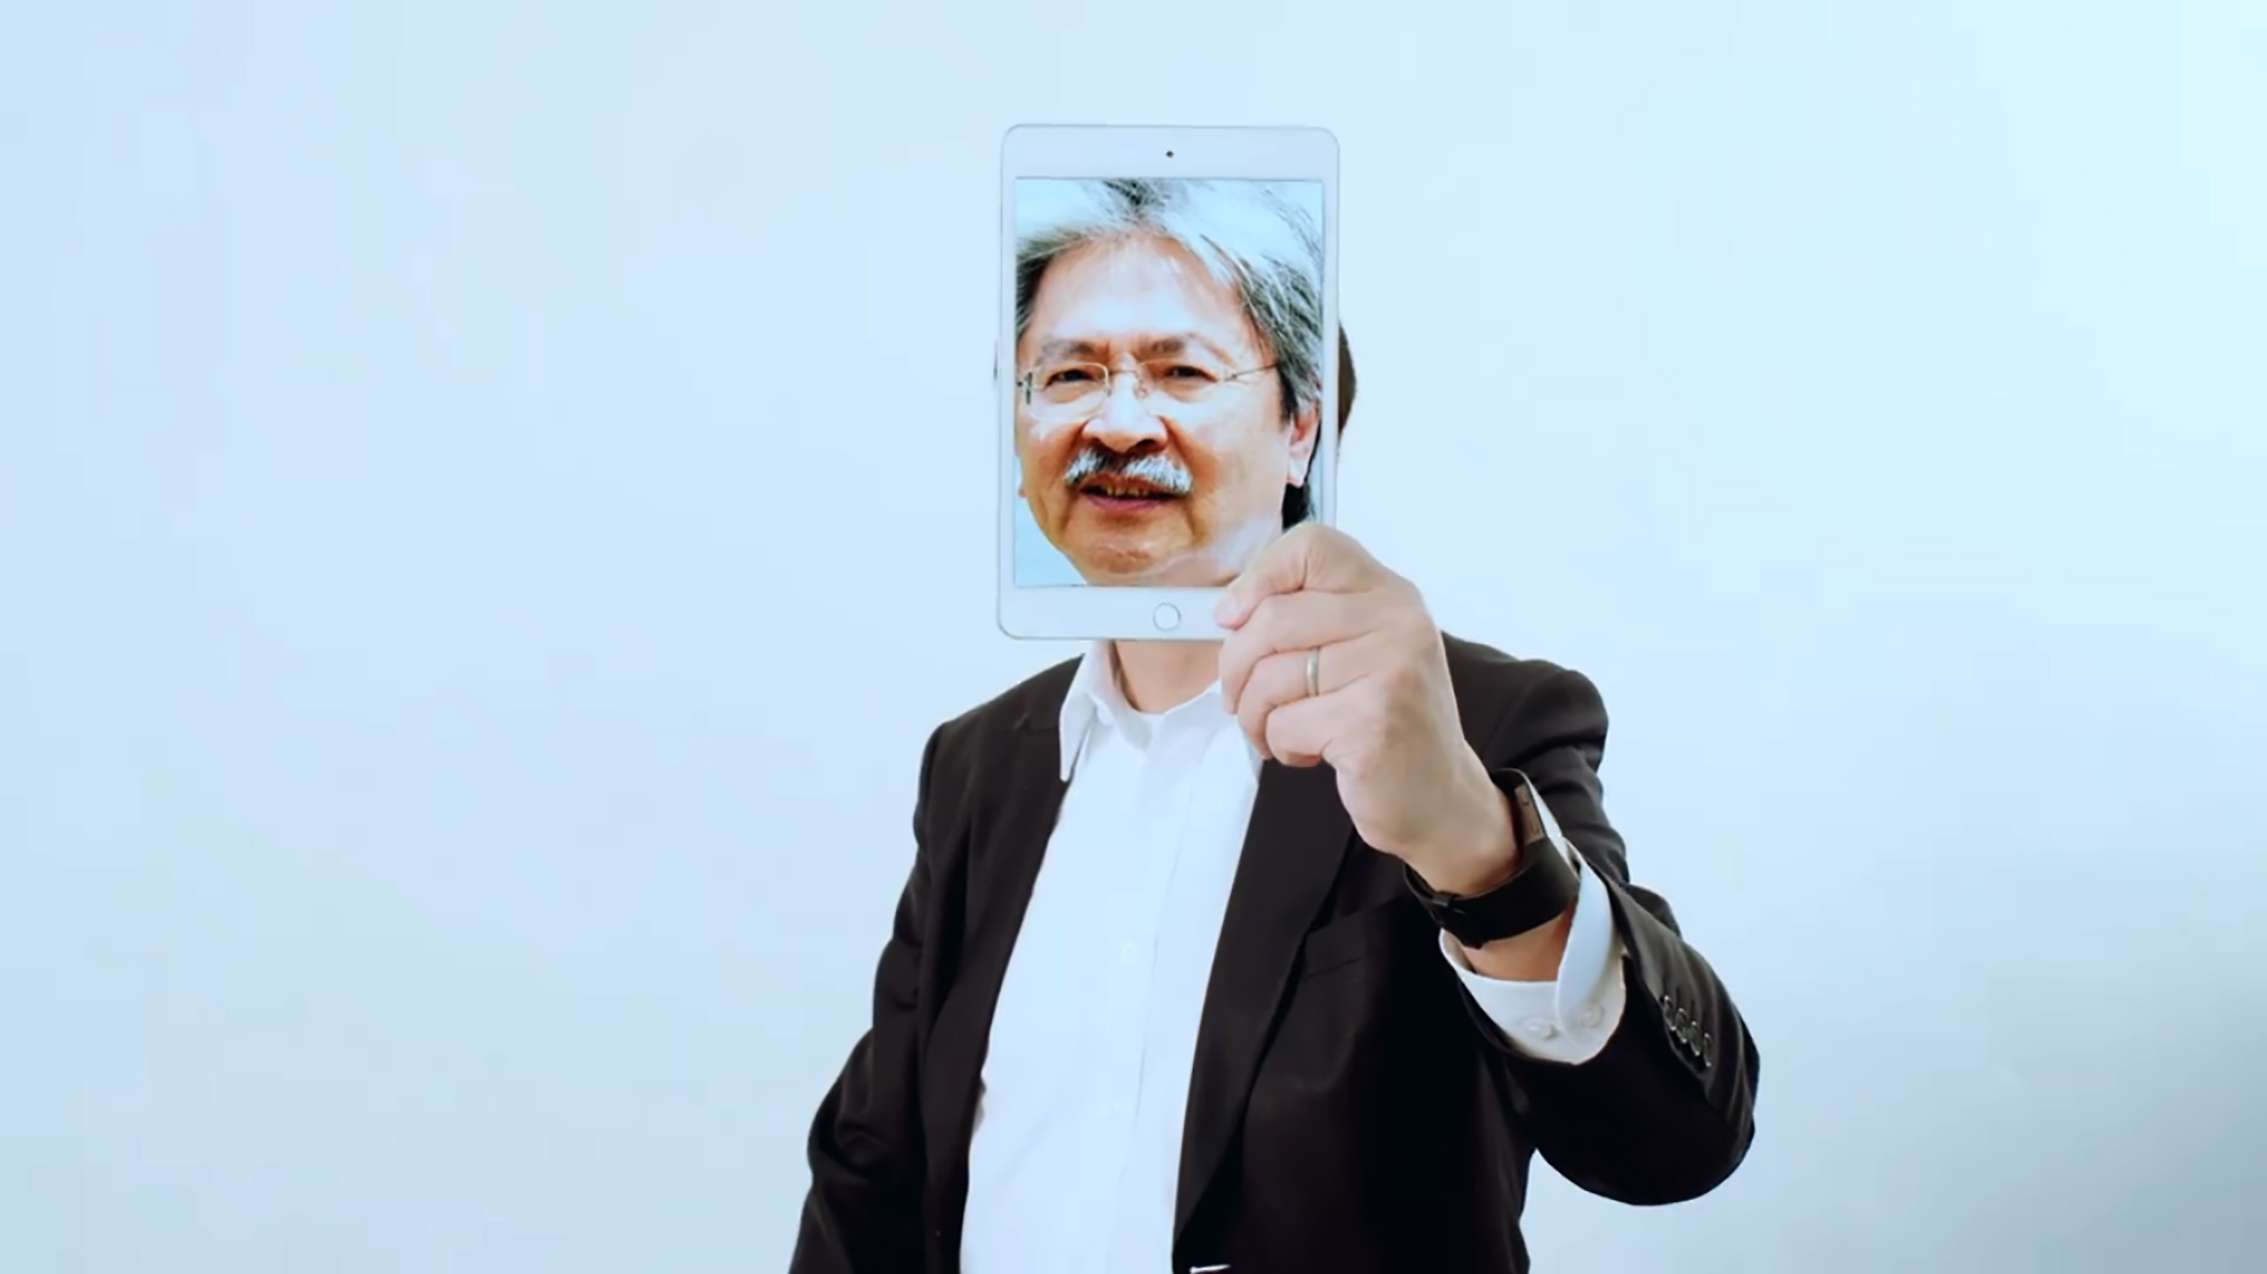 At the start of the video, Mak Chai-kwong held an image of former finance chief John Tsang in front of his own face. Photo: Facebook